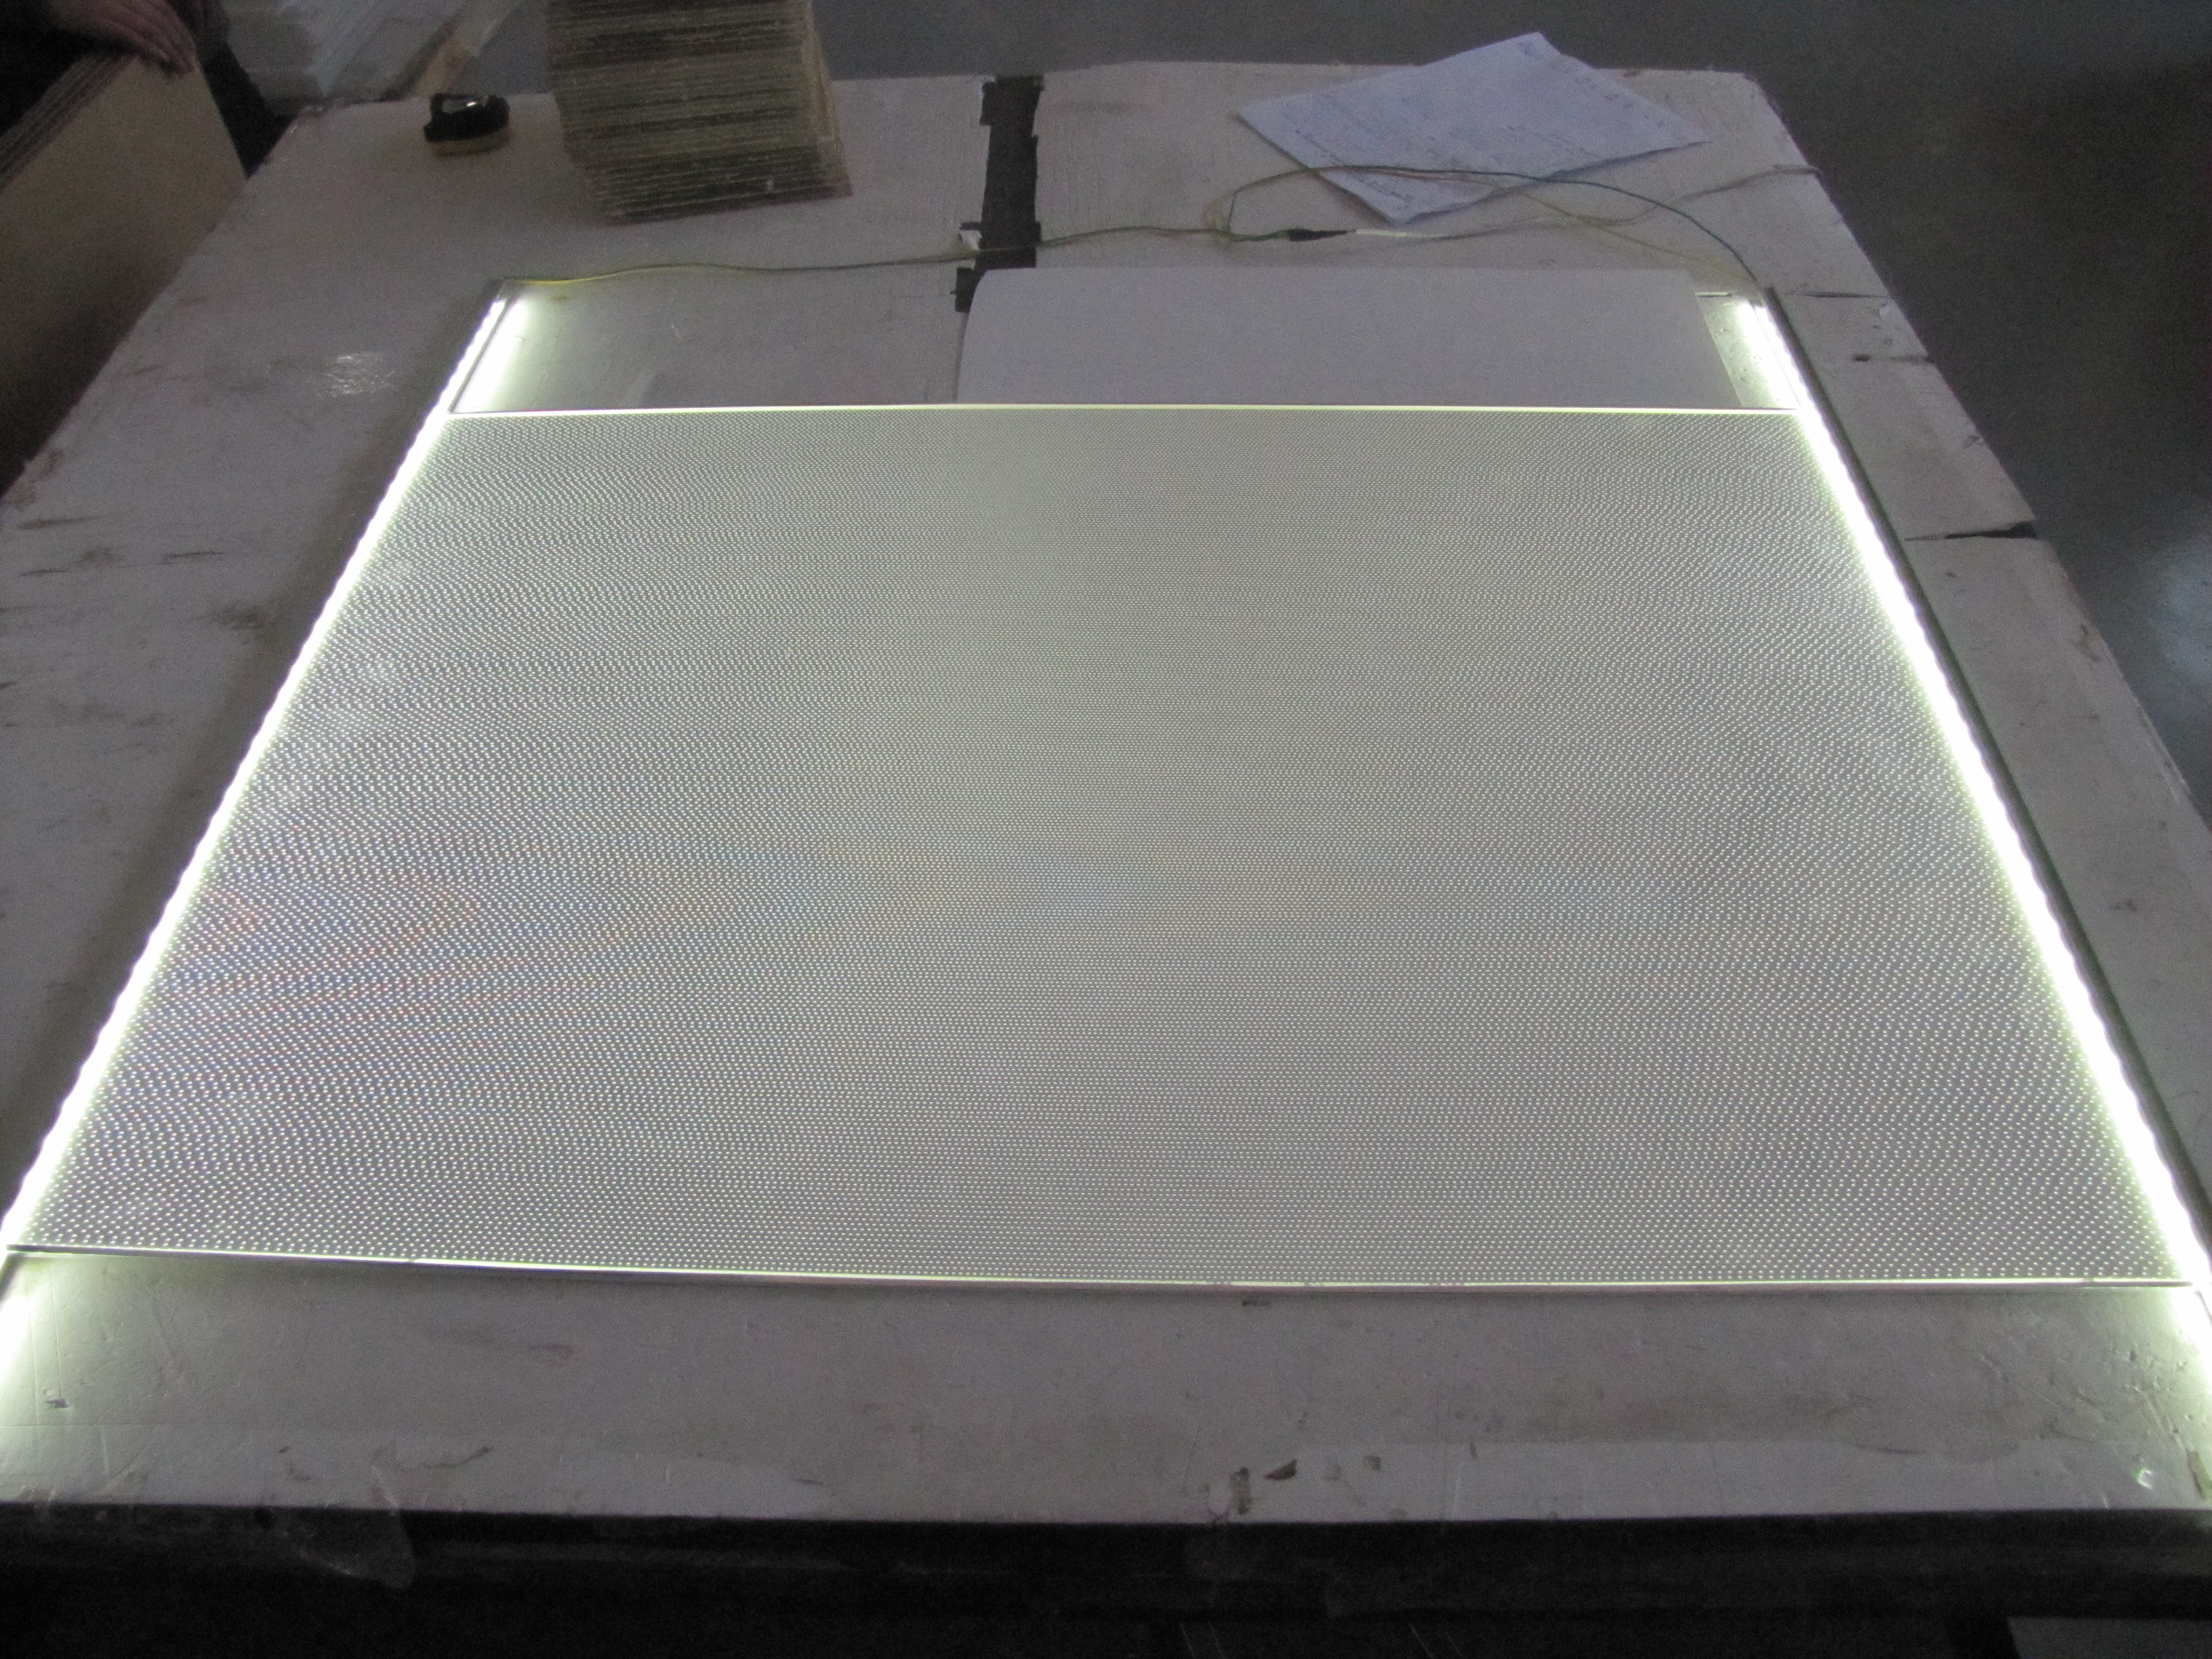 Edgelight approved led panel for lighting(Reflective film+led Diffuser plate+pmma lgp)